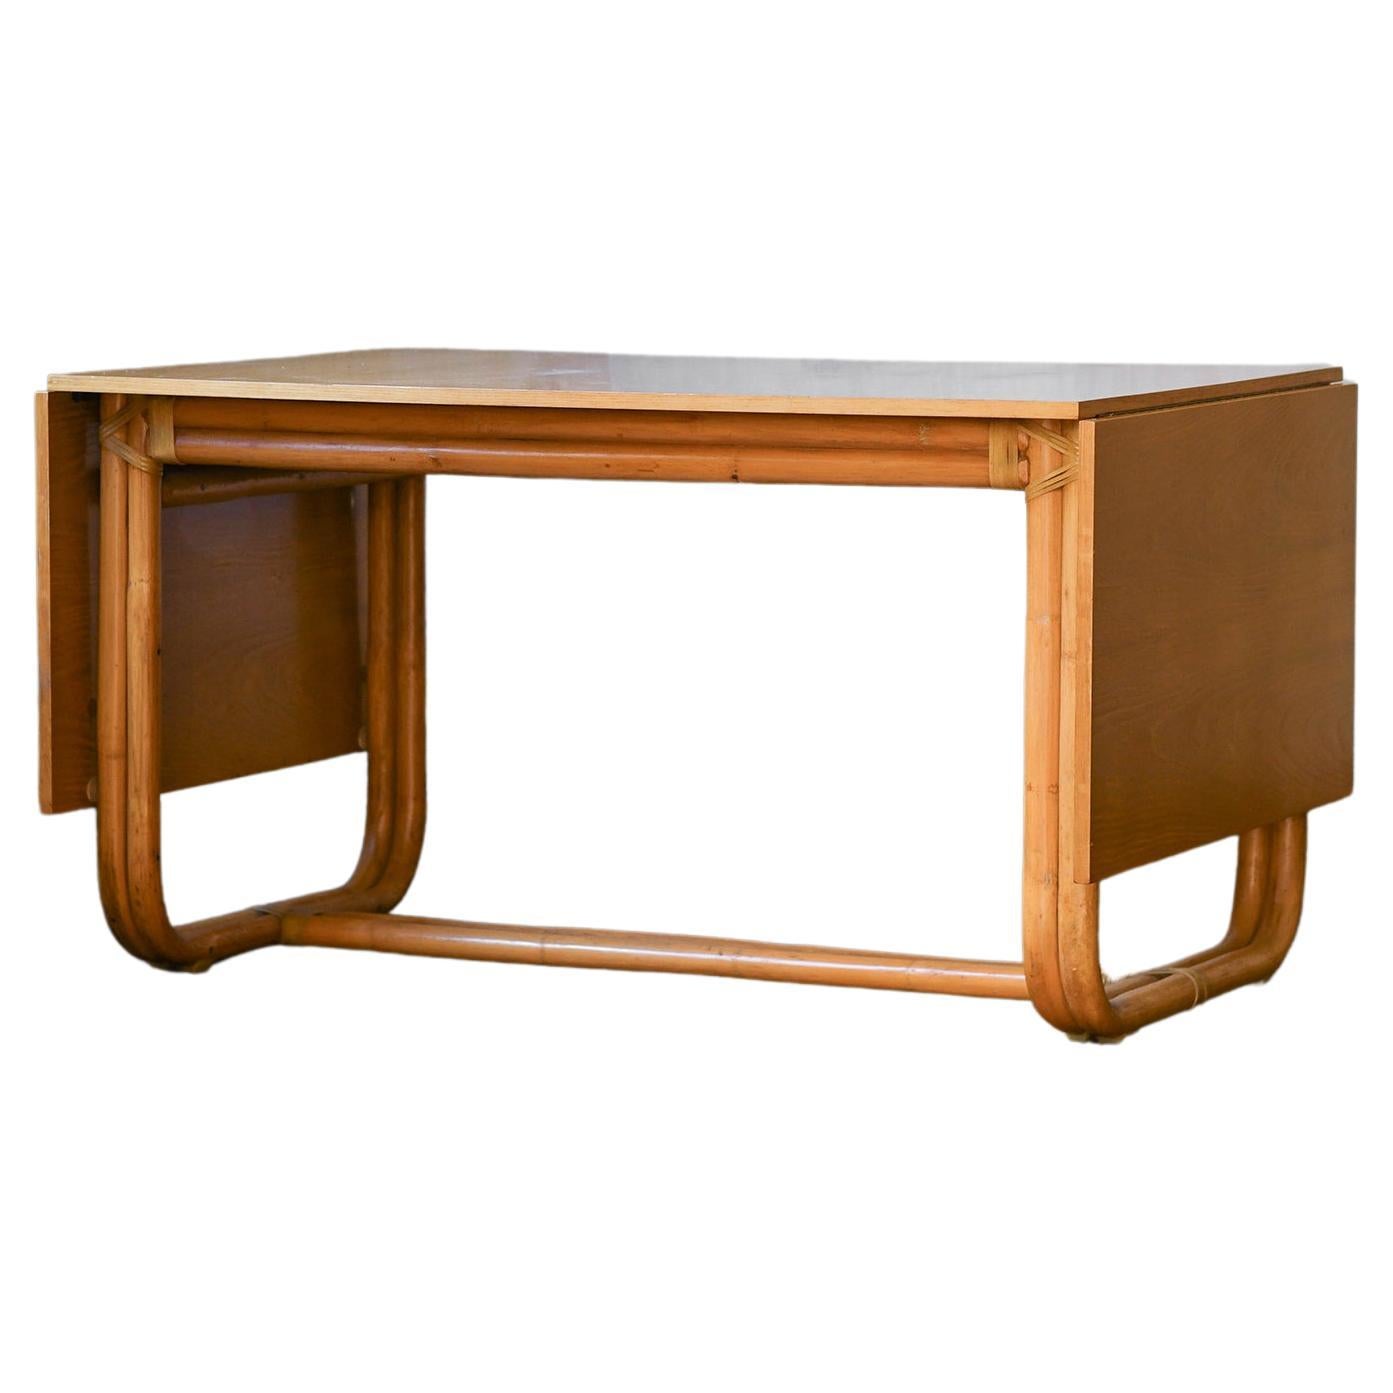 Sabatin bamboo table with extendable wooden shelf and leather bindings For Sale